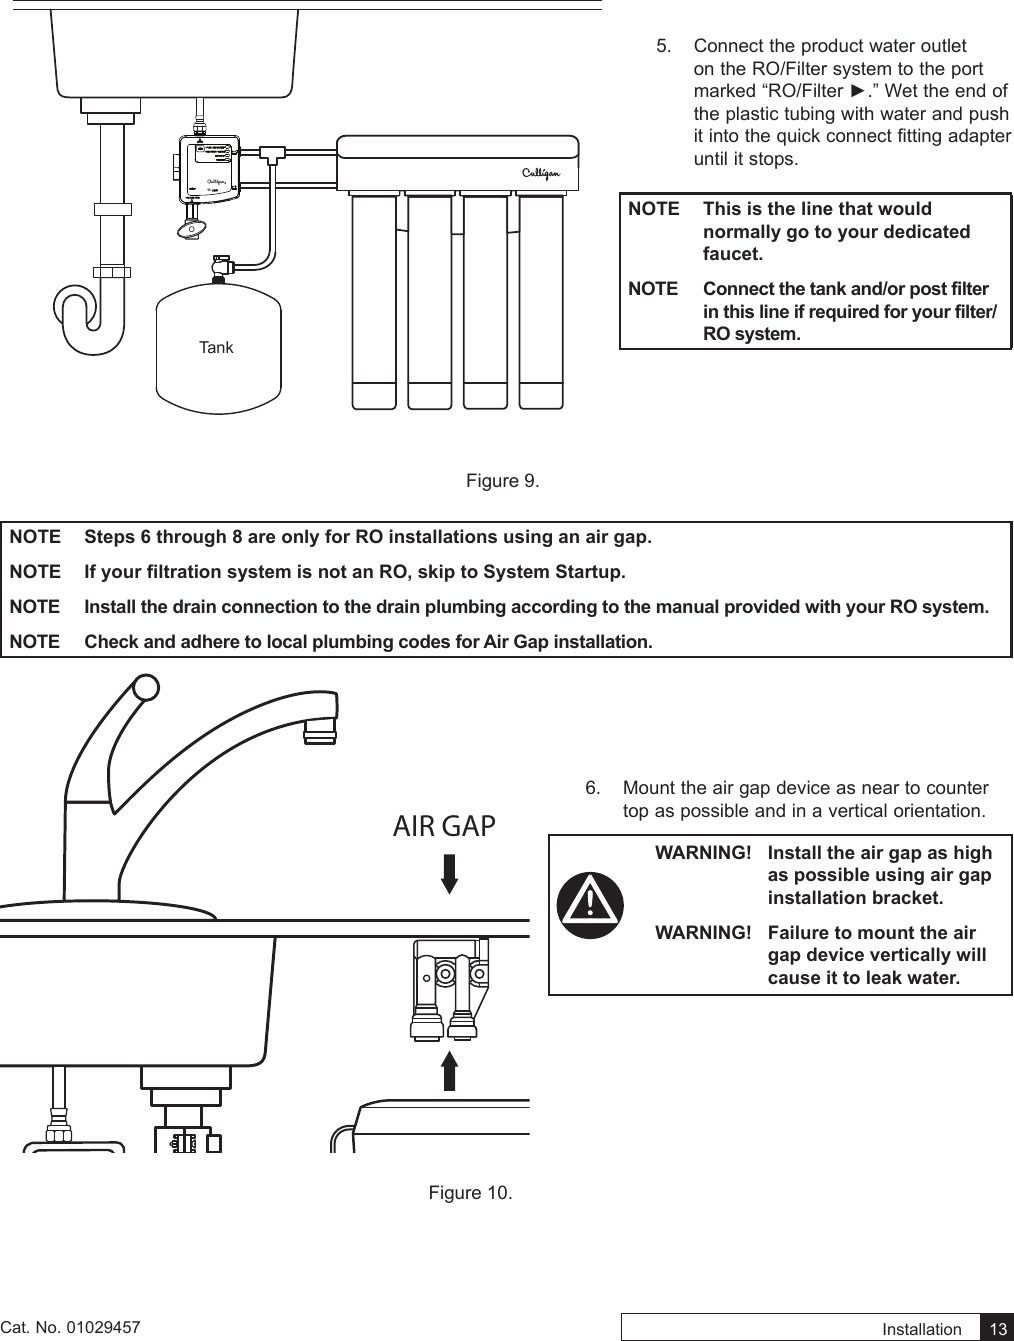 Installation    13Cat. No. 01029457TankFigure 9. NOTE  Steps 6 through 8 are only for RO installations using an air gap.NOTE  If your filtration system is not an RO, skip to System Startup.NOTE  Install the drain connection to the drain plumbing according to the manual provided with your RO system.NOTE  Check and adhere to local plumbing codes for Air Gap installation.AIR GAPFigure 10. 5.  Connect the product water outlet on the RO/Filter system to the port marked“RO/Filter►.”Wettheendofthe plastic tubing with water and push it into the quick connect fitting adapter until it stops.NOTE  This is the line that would normally go to your dedicated faucet.NOTE  Connect the tank and/or post filter in this line if required for your filter/RO system.6.  Mount the air gap device as near to counter top as possible and in a vertical orientation.WARNING!  Install the air gap as high as possible using air gap installation bracket.WARNING!  Failure to mount the air gap device vertically will cause it to leak water.